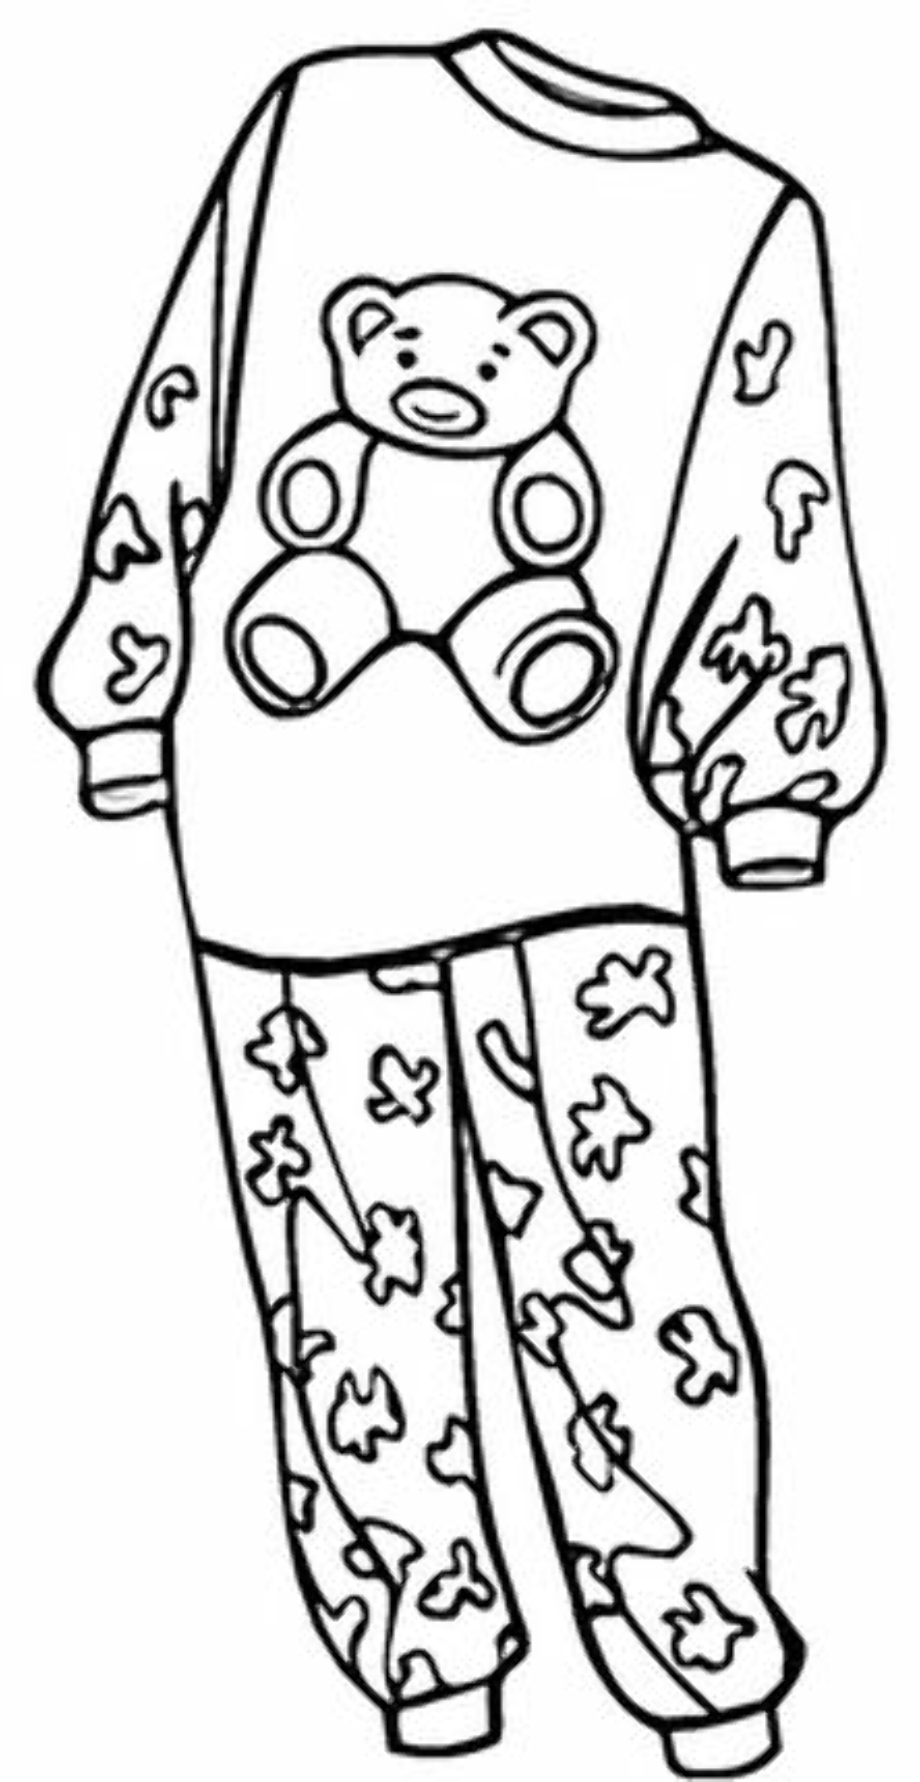 Download High Quality pajama clipart outline Transparent PNG Images